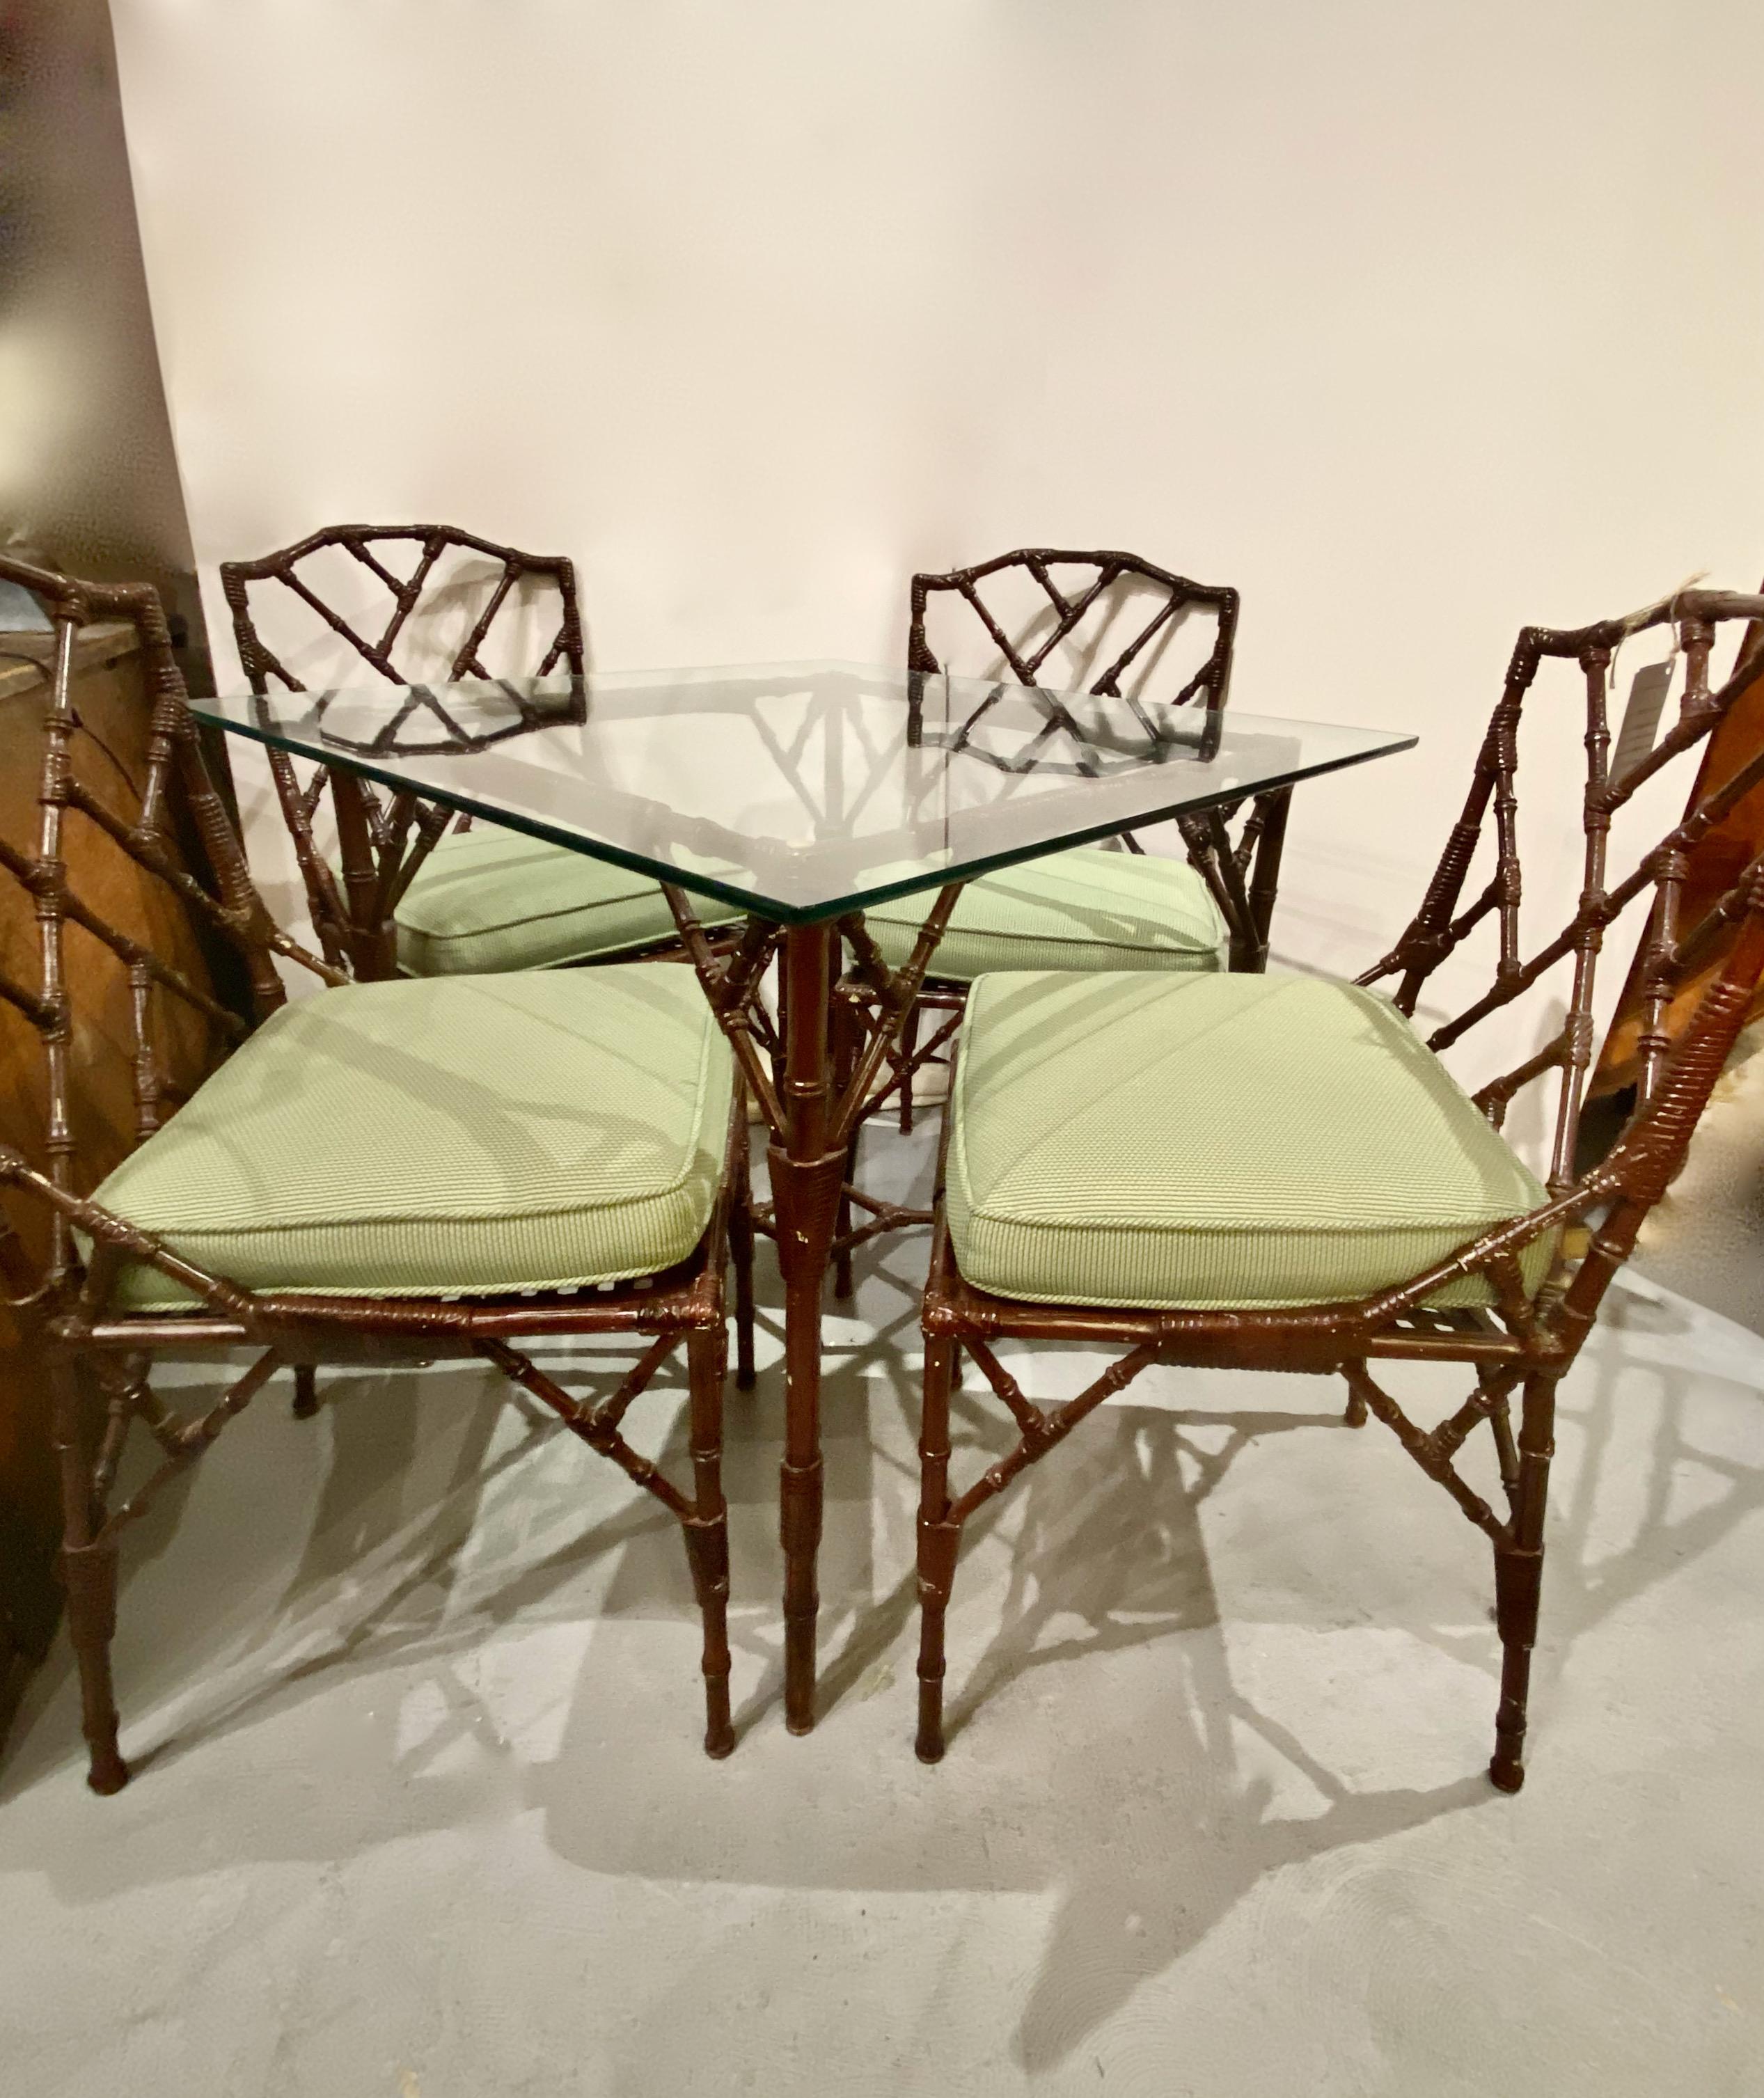 This is an unusual set of 4 Chinese Chippendale cast aluminum side chairs in the Chinese Chippendale style together with a matching cast aluminum faux bamboo table with a glass top. The level of detail in the casting of the chairs and the table is